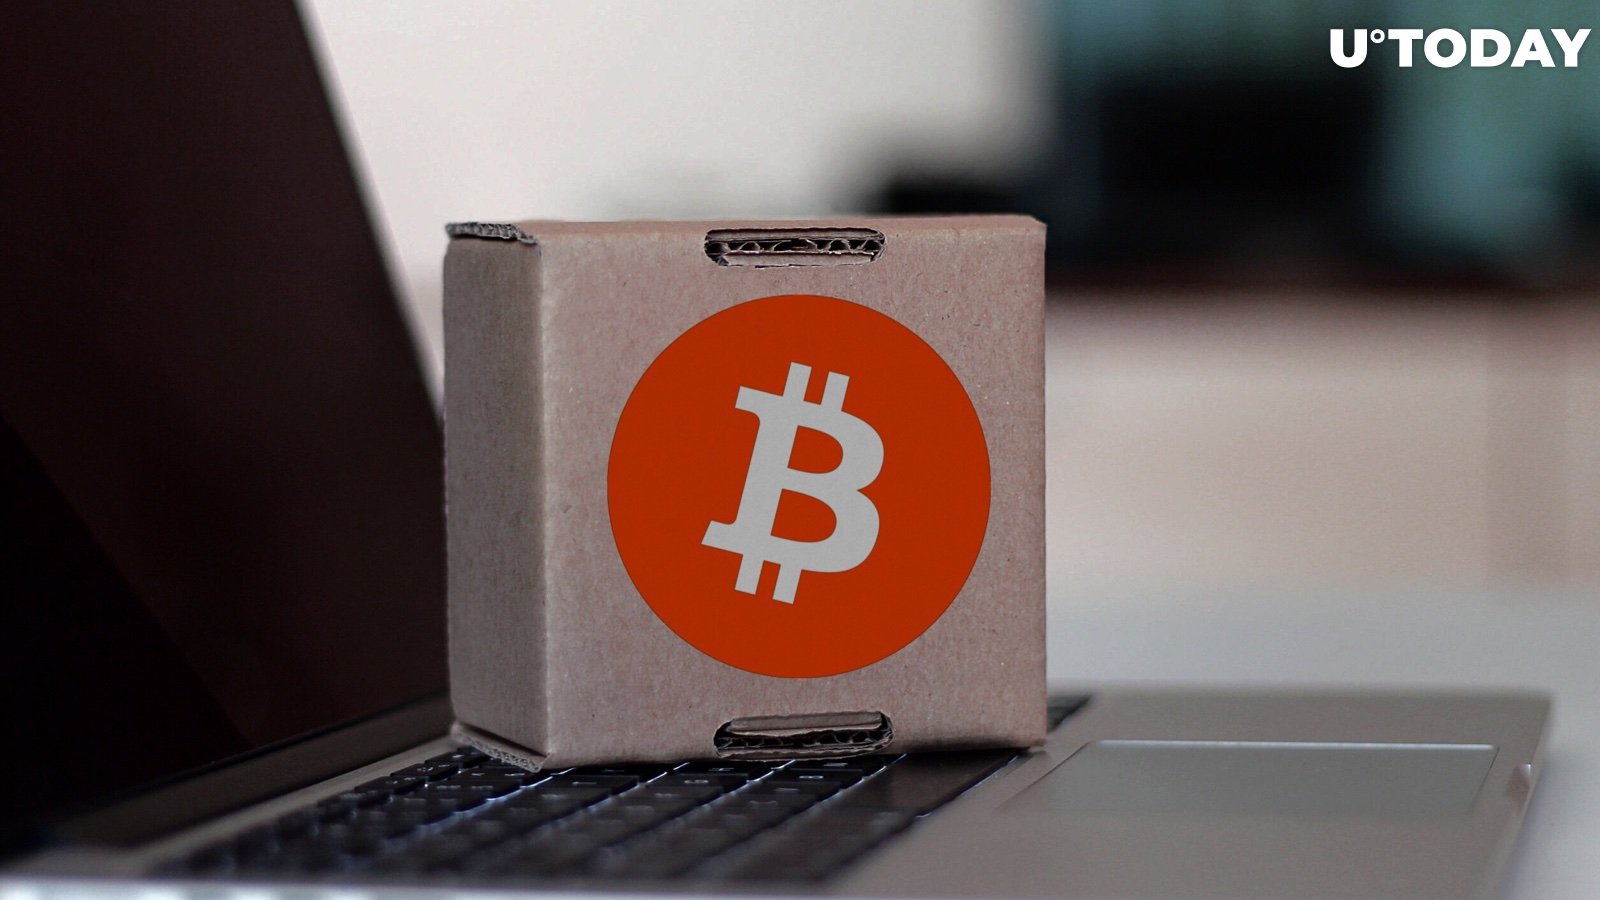 Forbes: Recent Study Shows Bitcoin Market Is Rising Again, BTC Turns Less Volatile